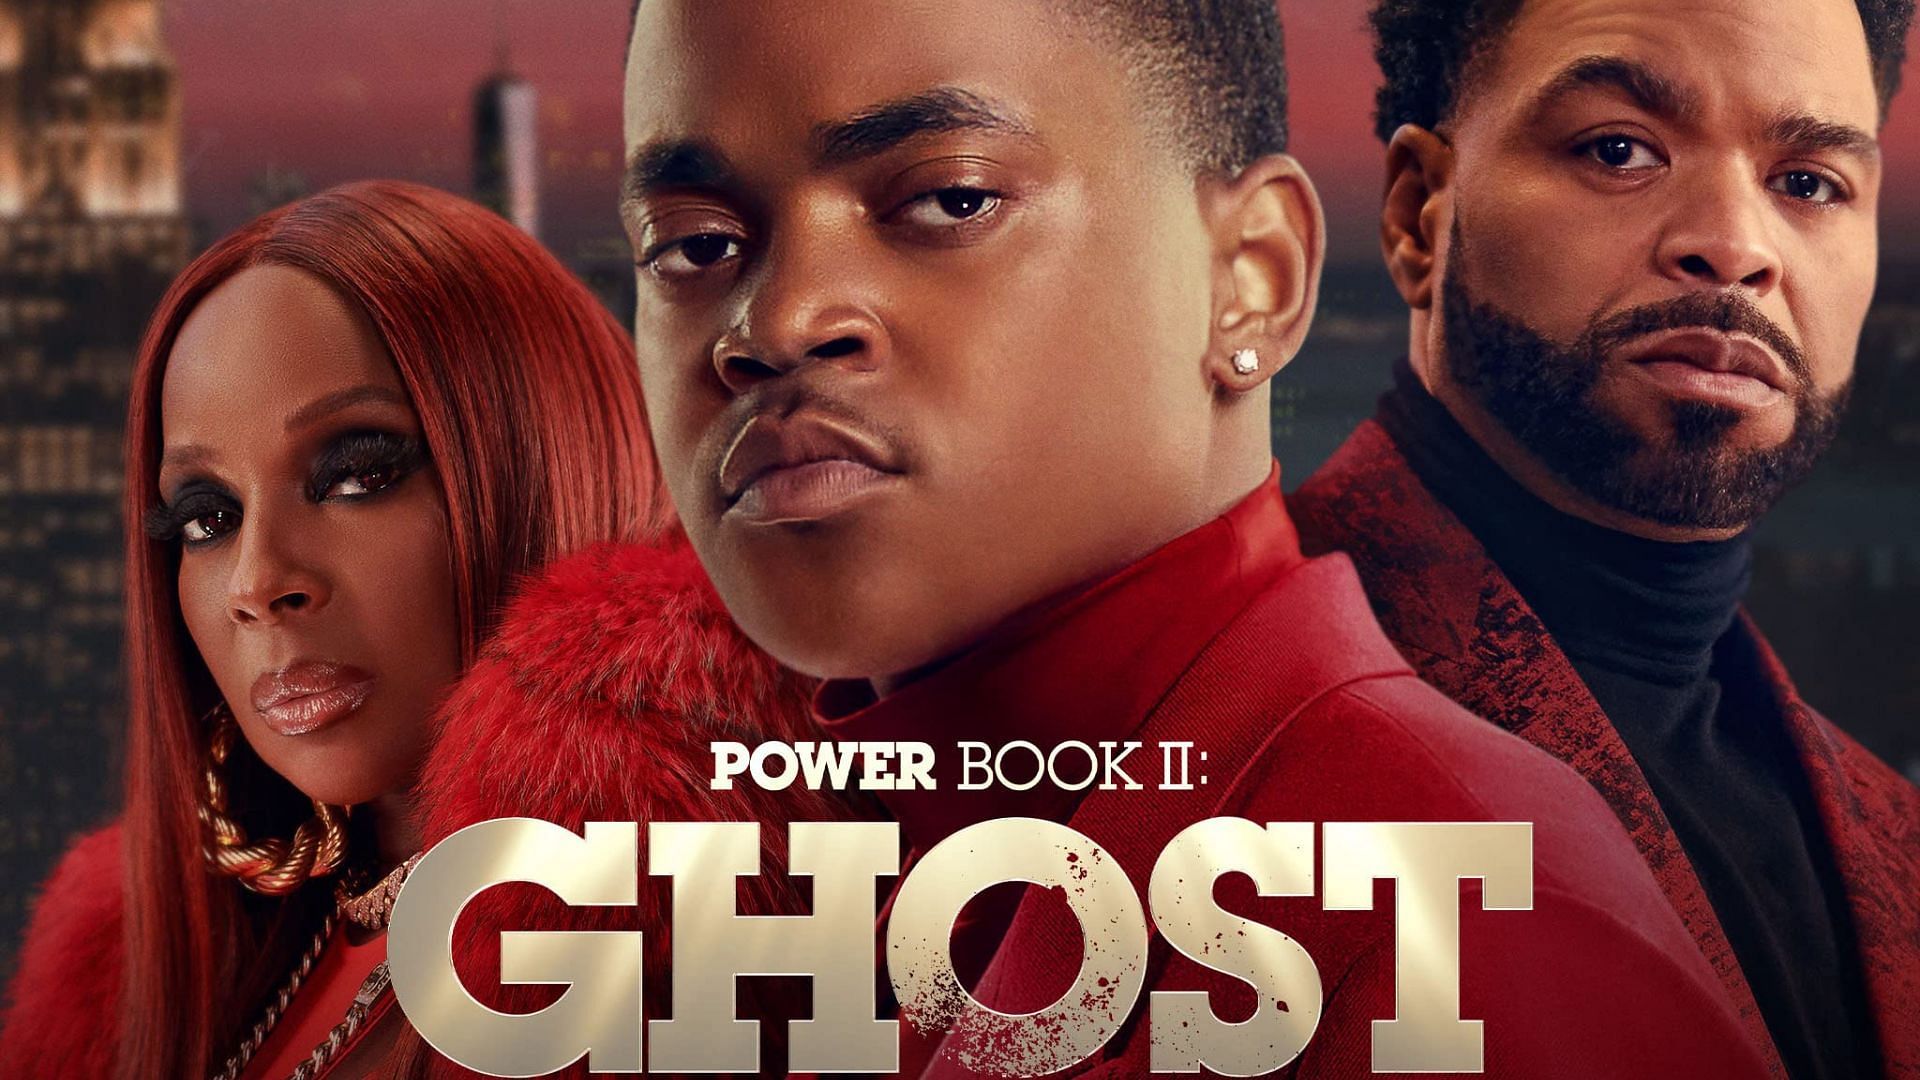 What happened in the last episode of Power Book 2: Ghost?